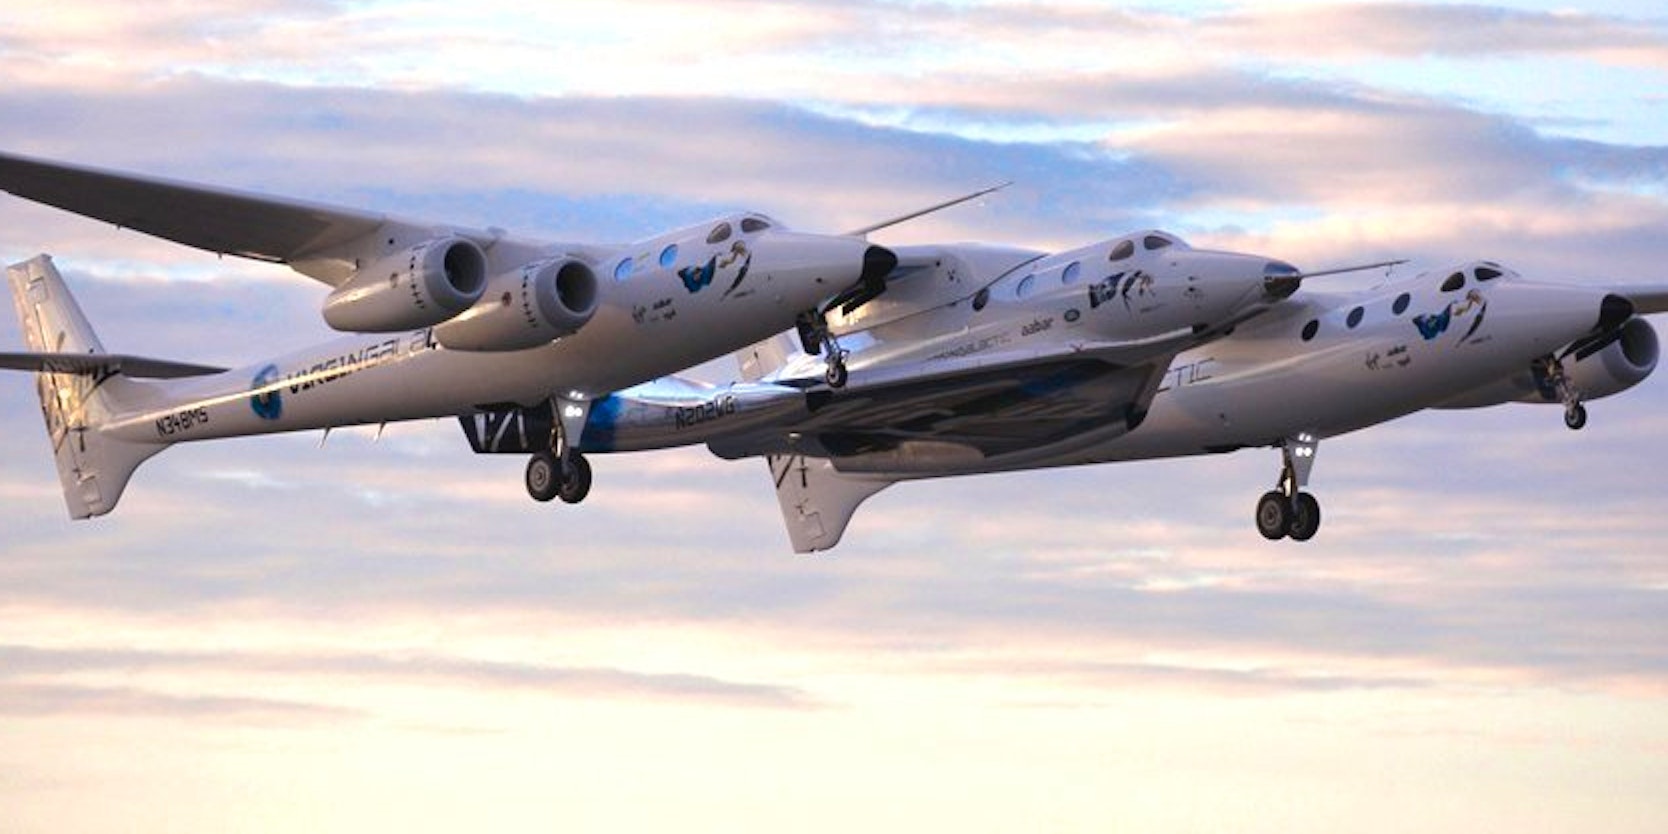 Virgin Galactic's VSS Unity took to the skies for their 3rd carry test this morning. 